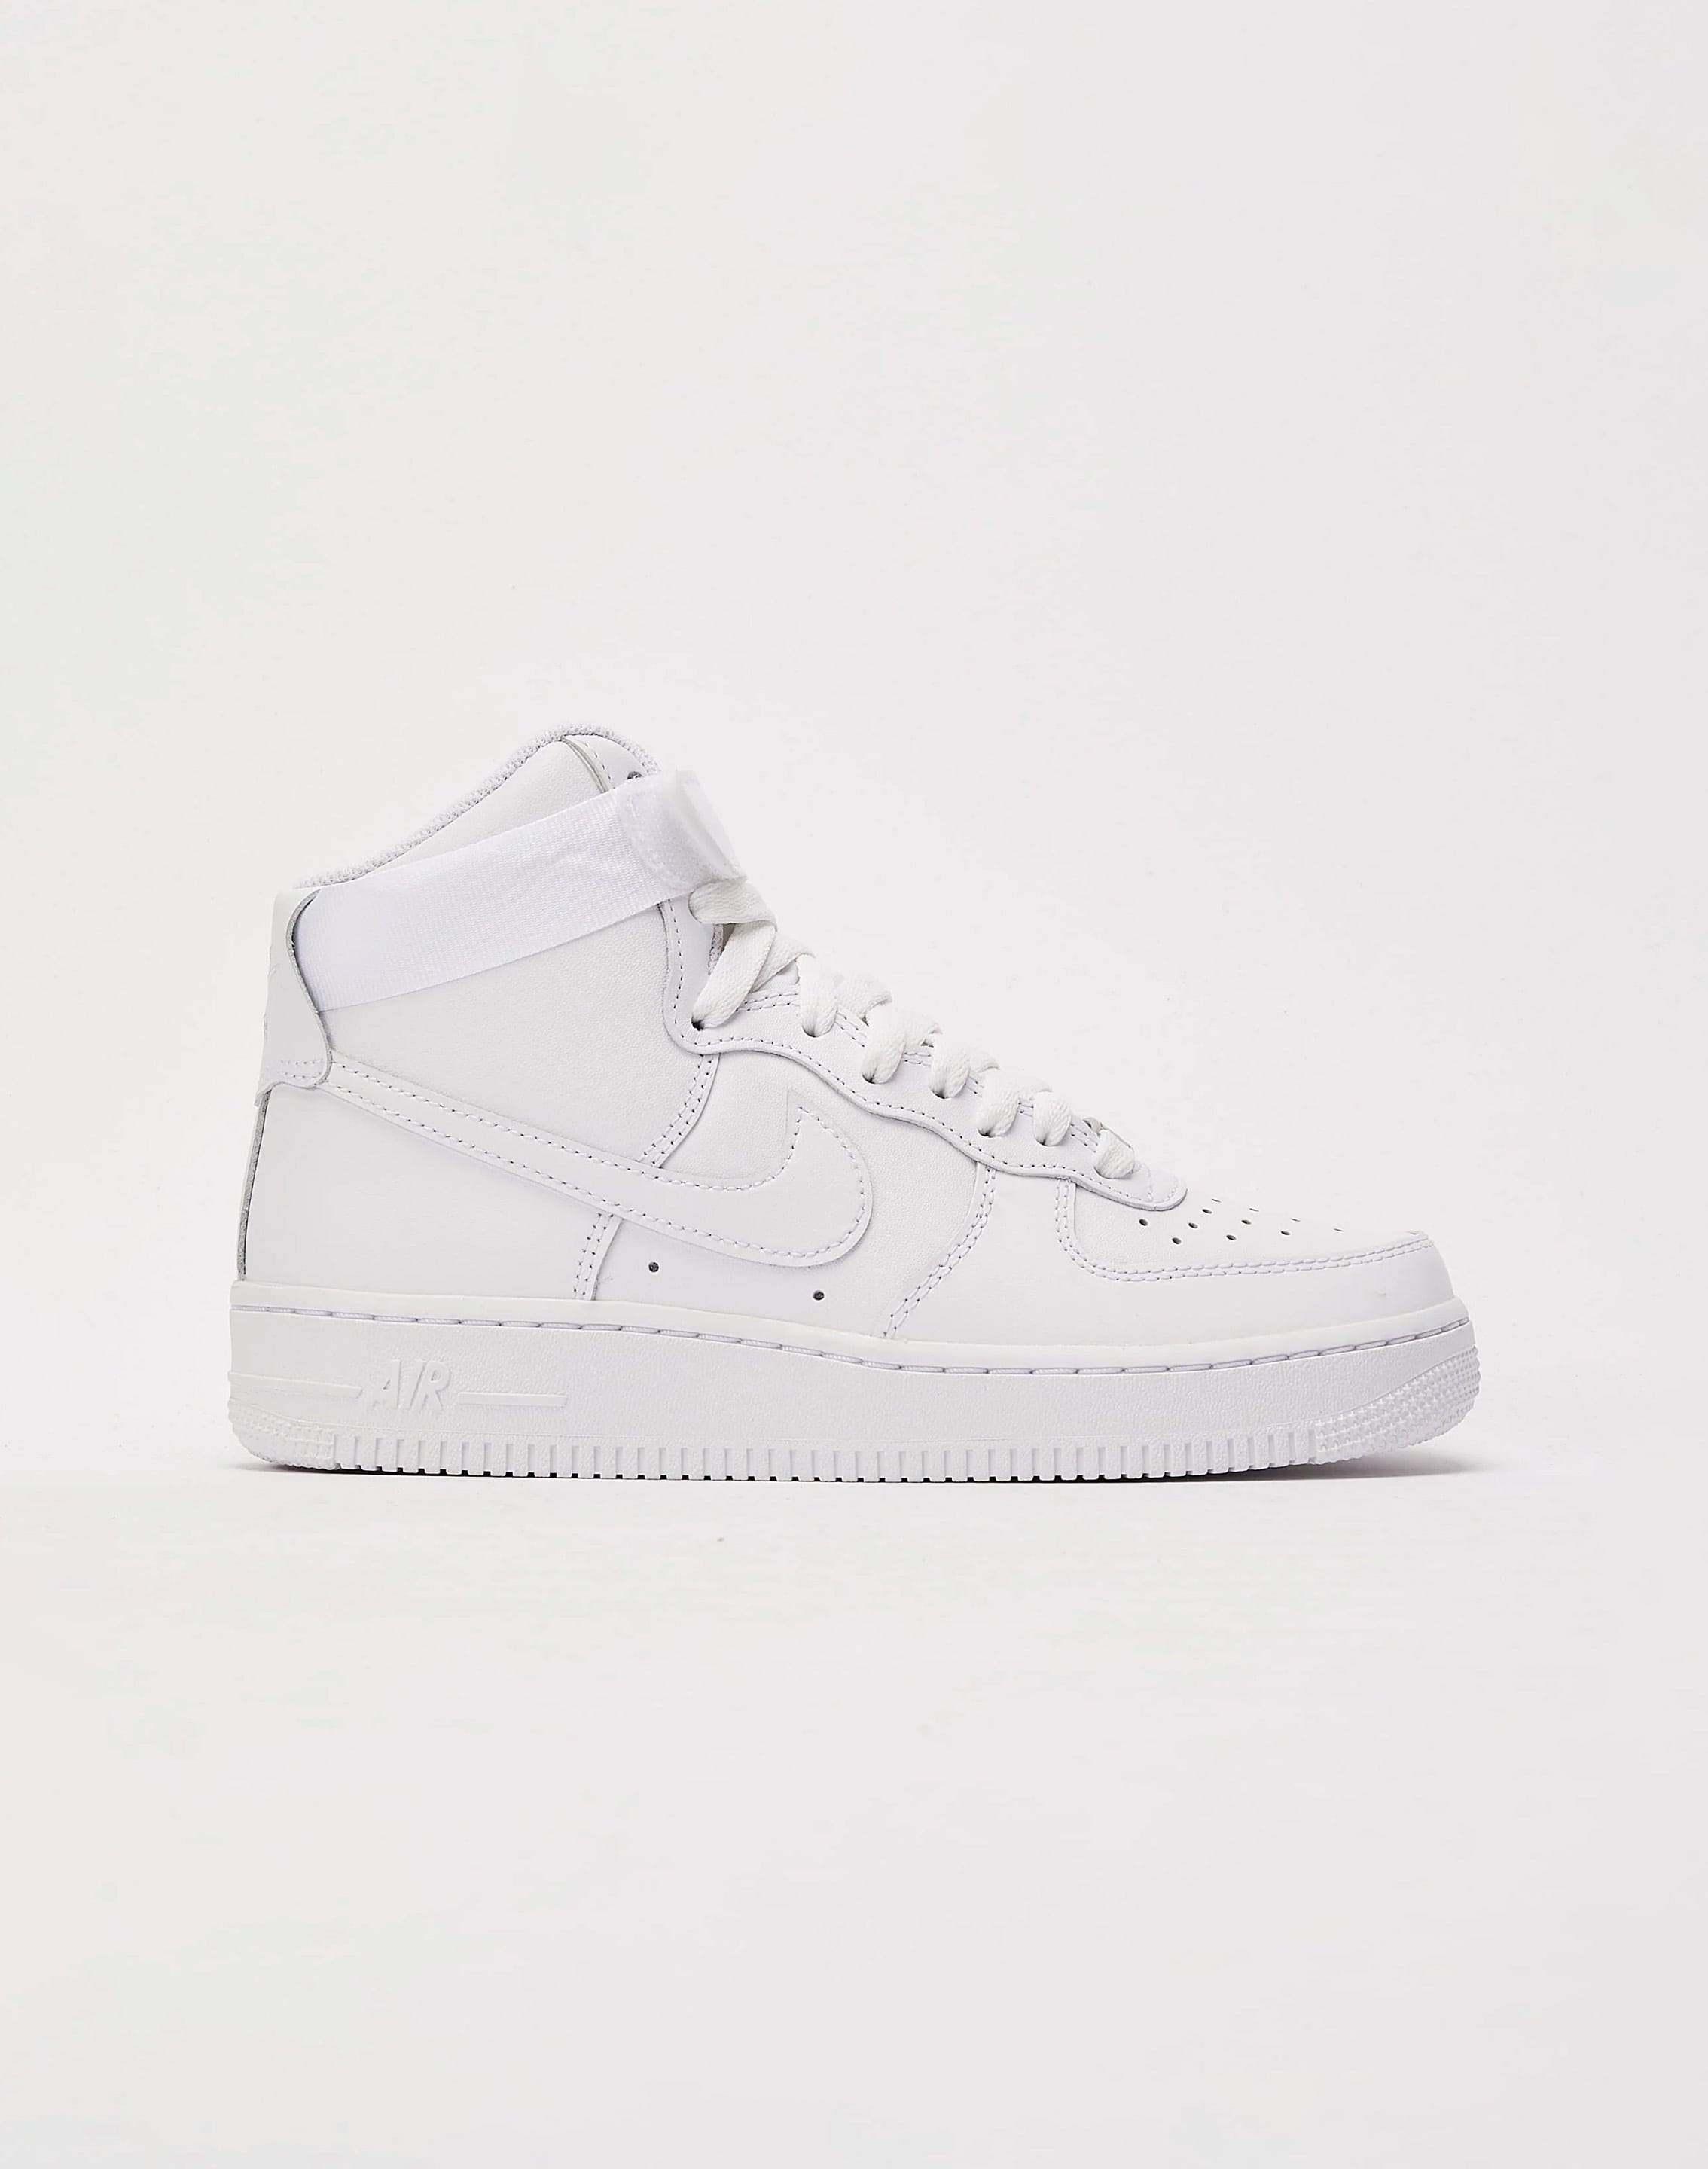 womens white air force 1 size 10